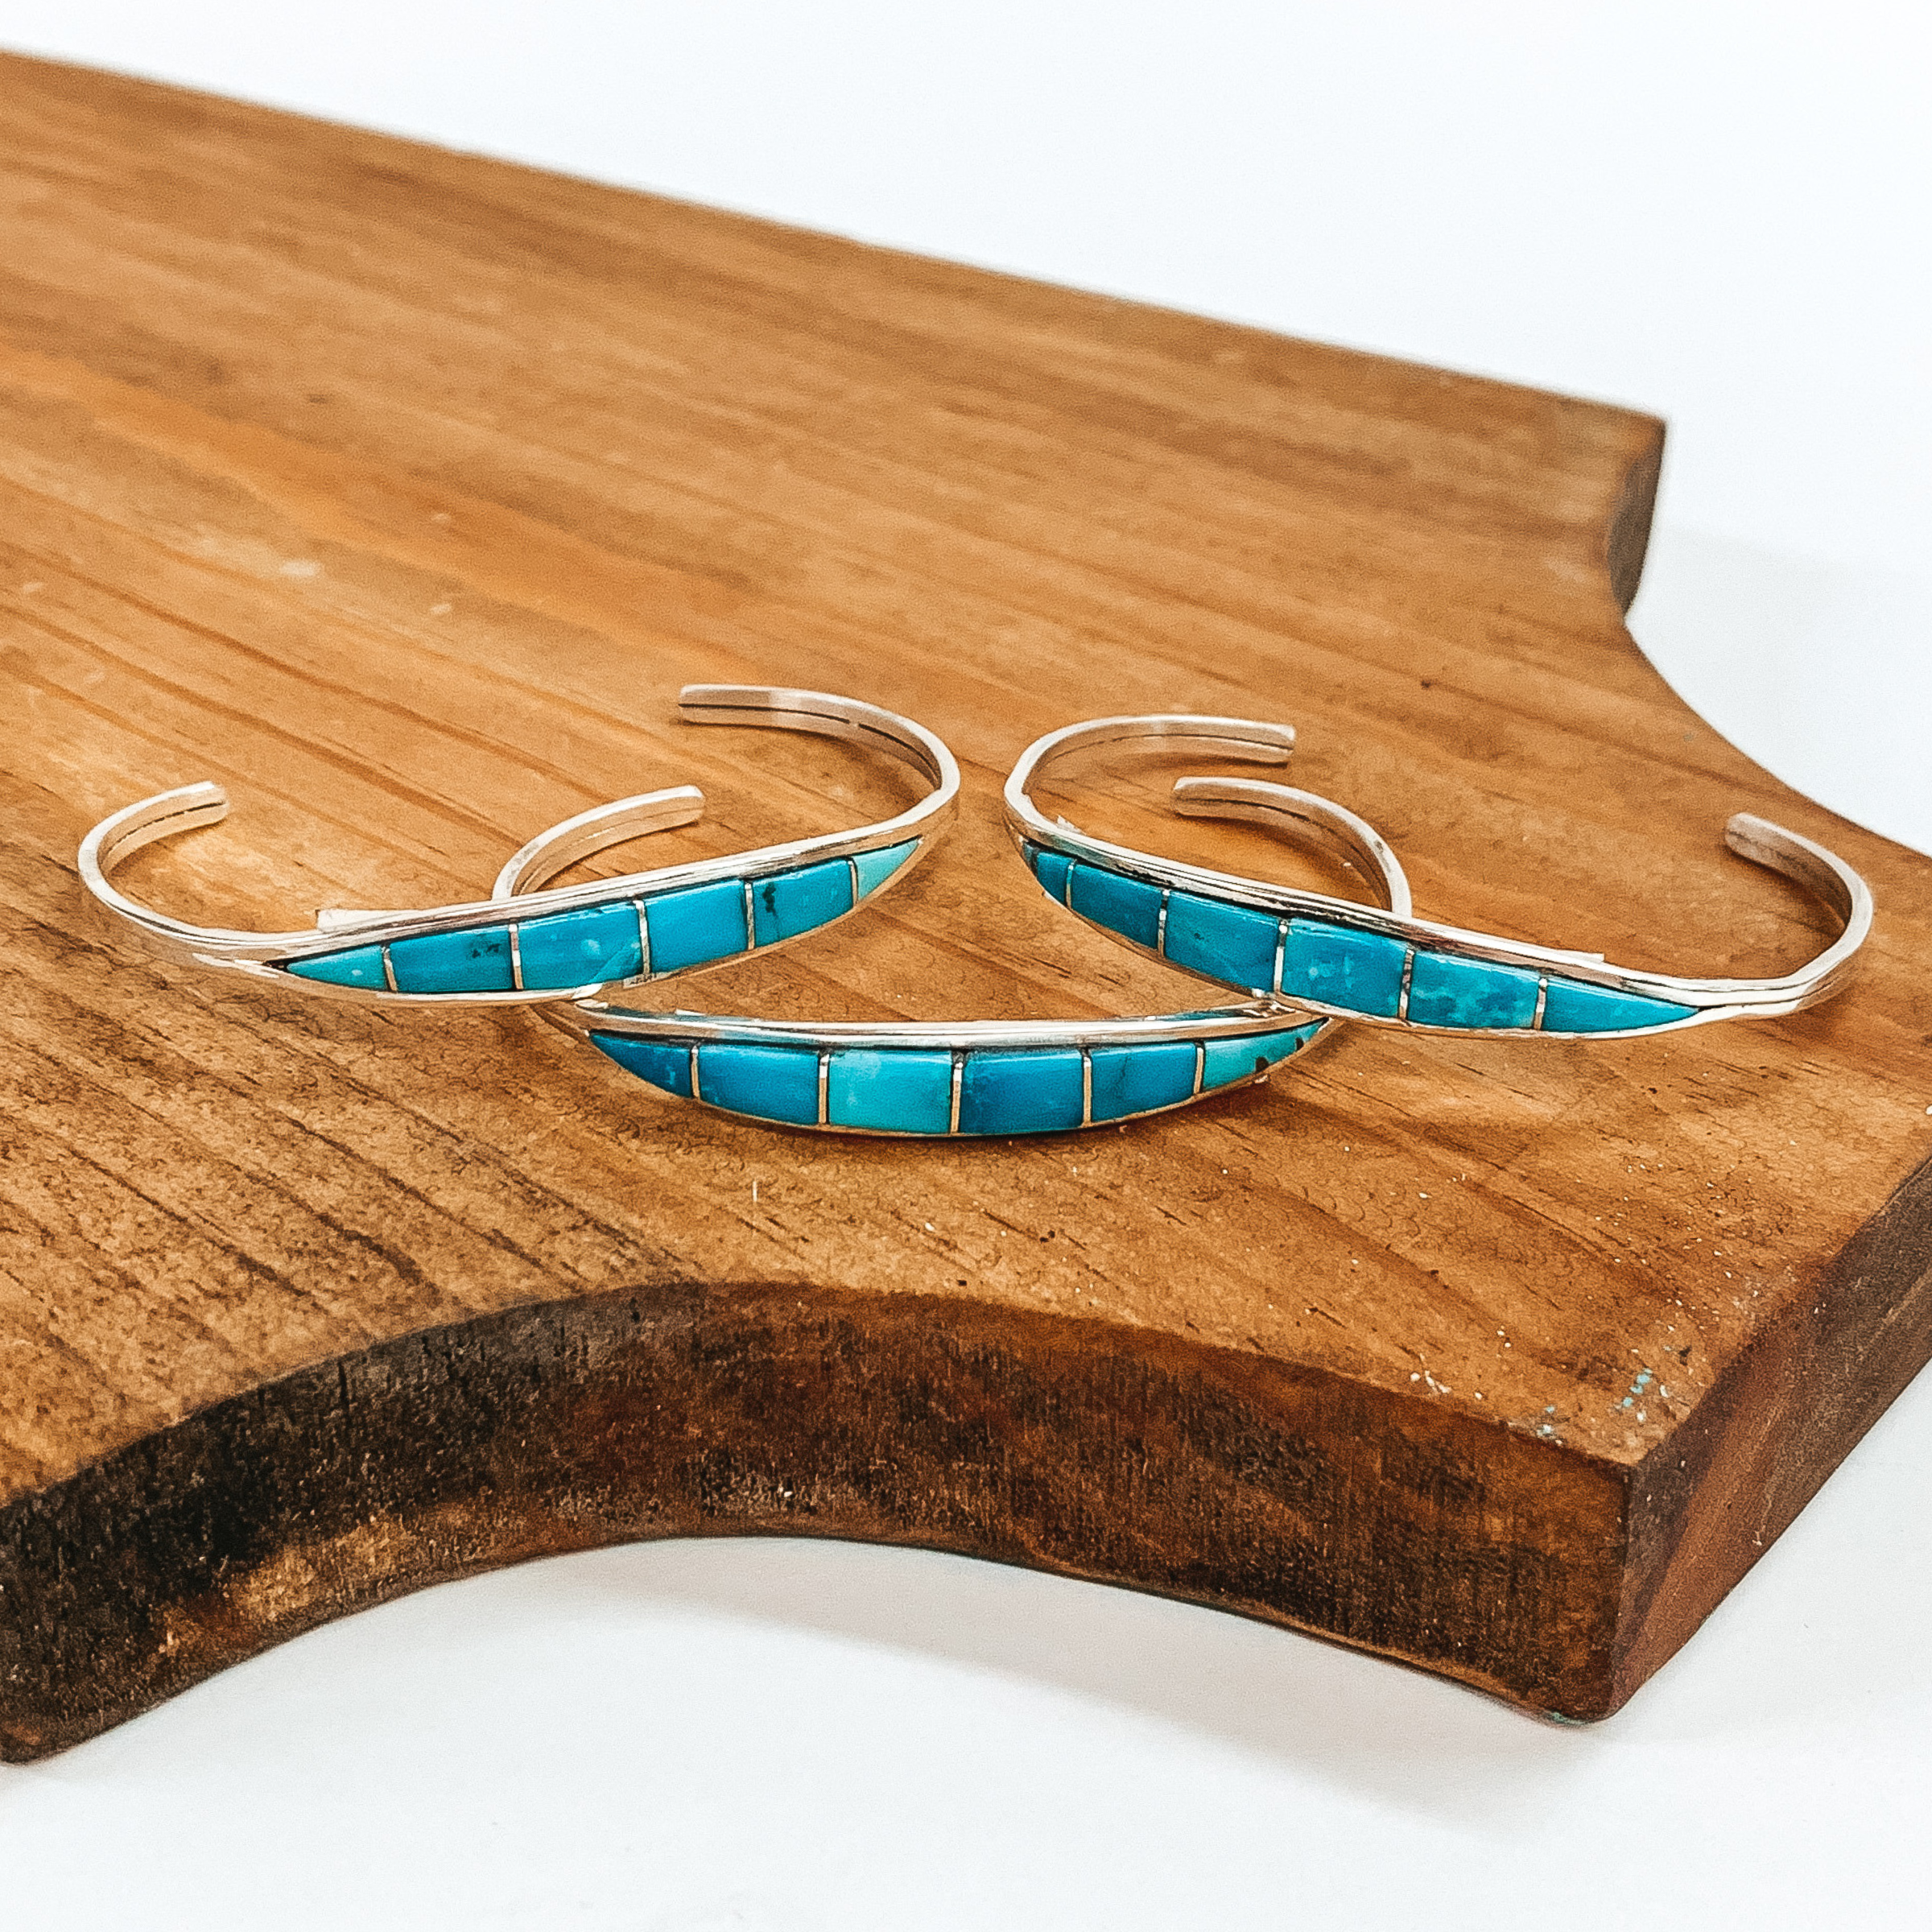 Cena Wethobee | Zuni Handmade Sterling Silver Cuff Bracelet with Six Kingman Turquoise Stones - Giddy Up Glamour Boutique